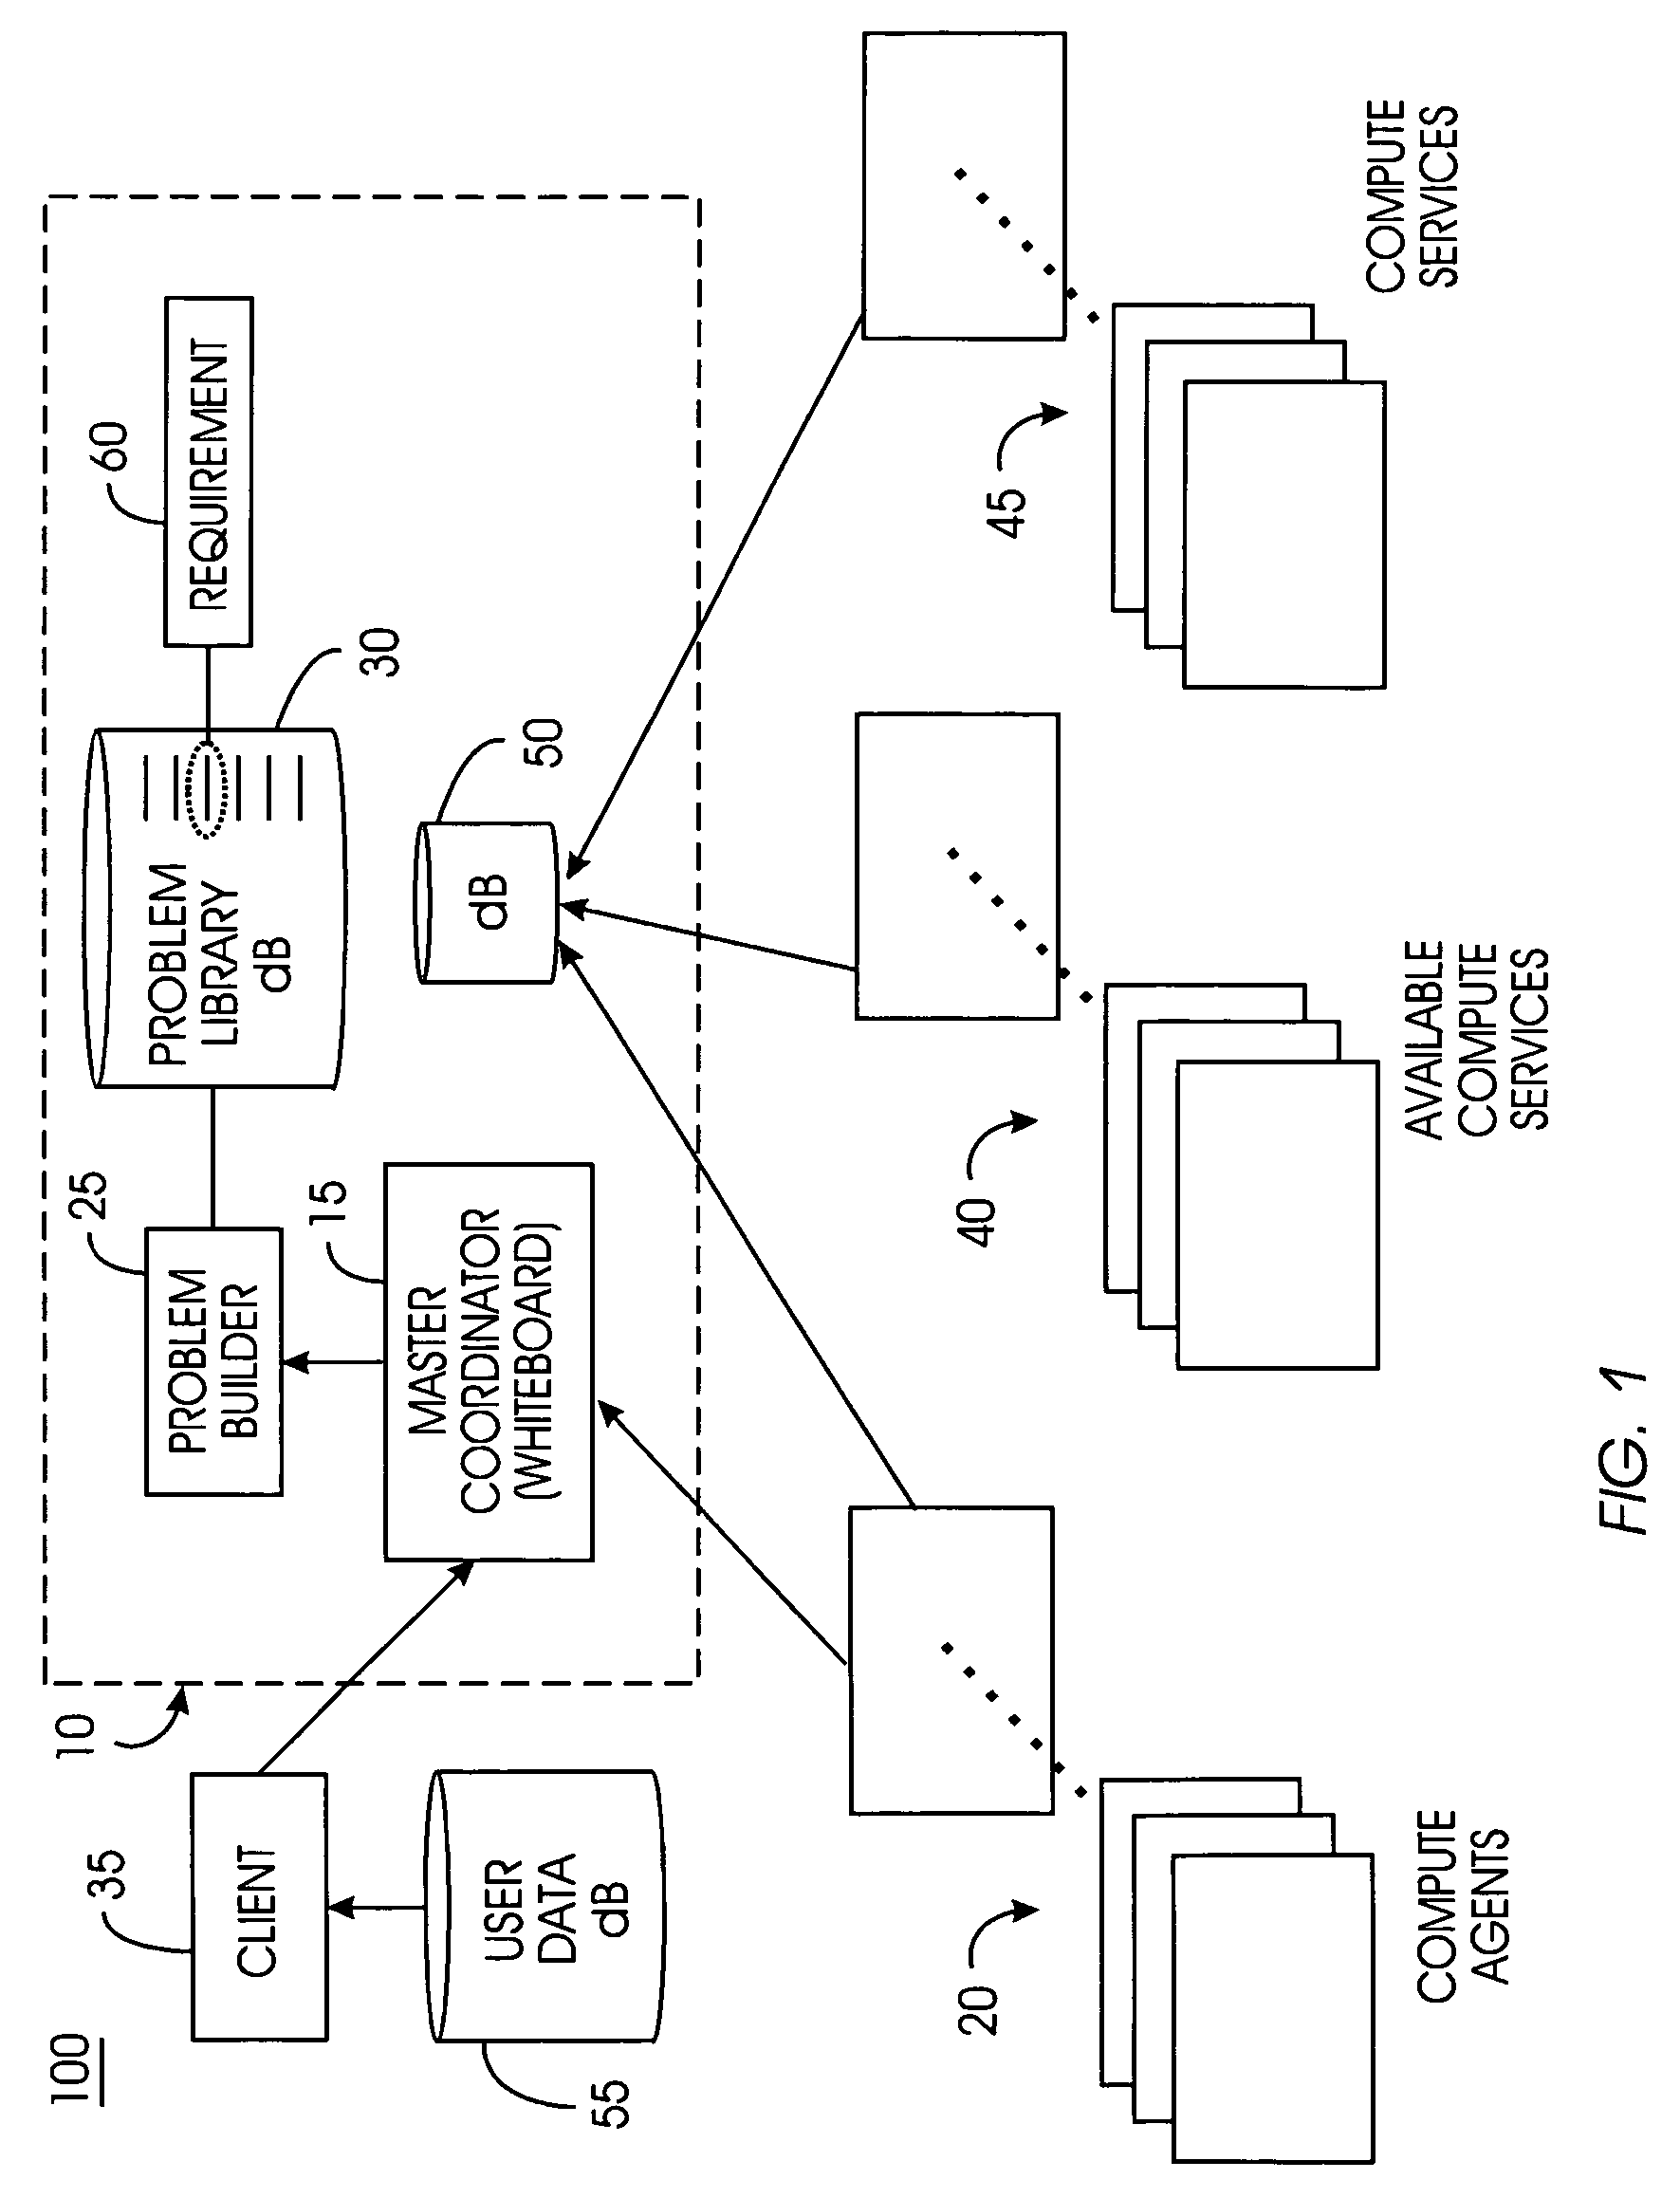 System and method for balancing a computing load among computing resources in a distributed computing problem